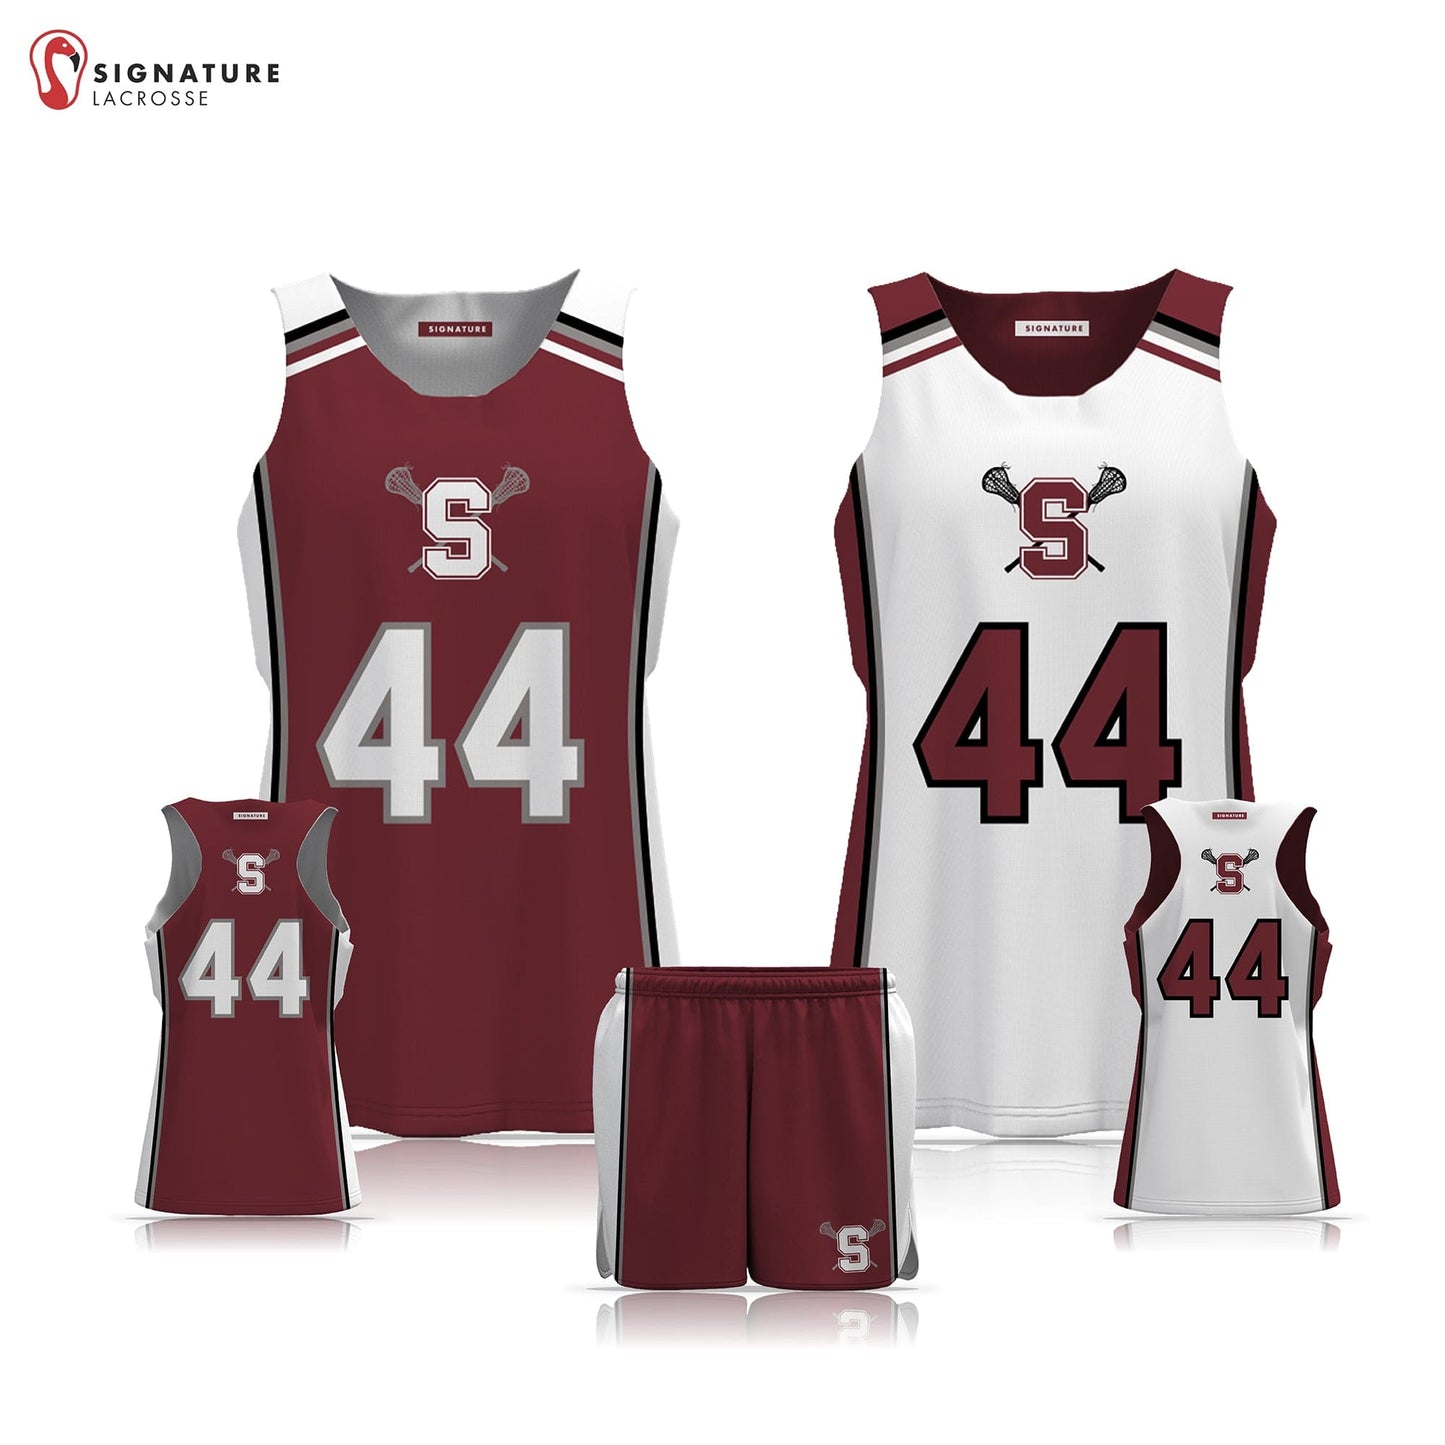 State College Women's 2 Piece Player Game Package: 7-8 Signature Lacrosse